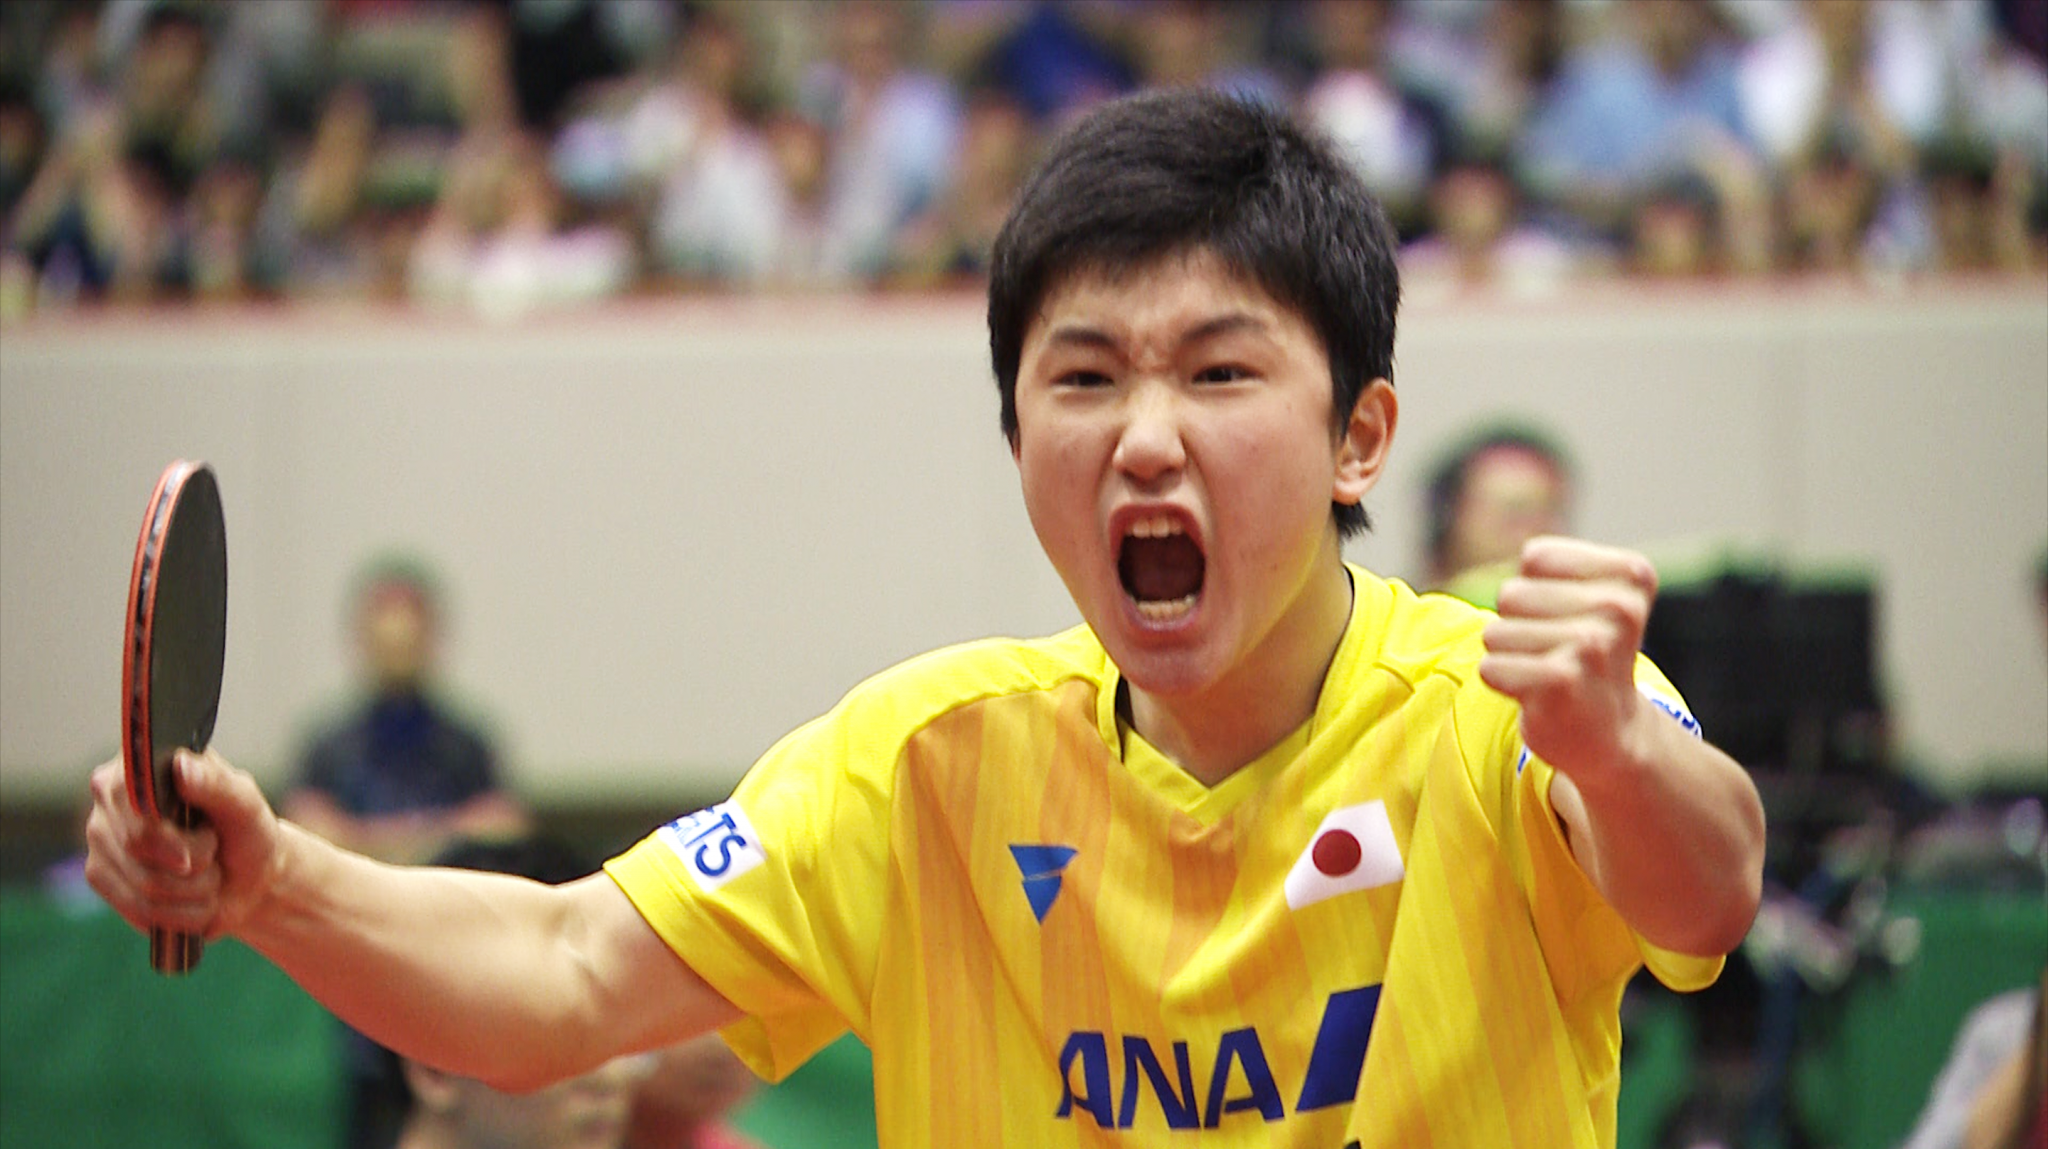 Tomokazu Harimoto has stunned table tennis with his Japan Open victory ©ITTF